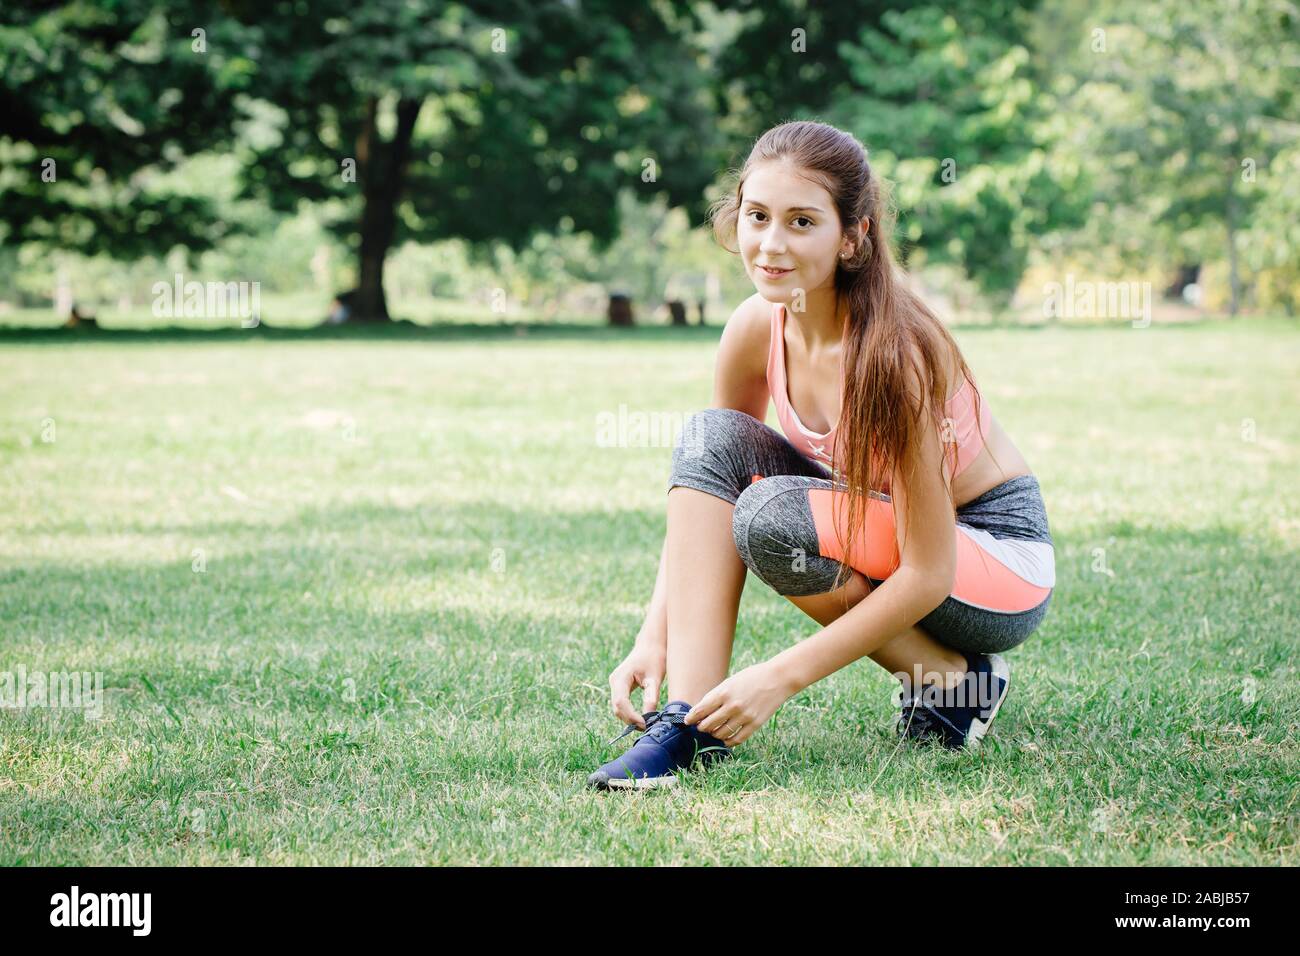 Beautiful sport exercise fit girl tie her shoe at outdoor green park. Stock Photo